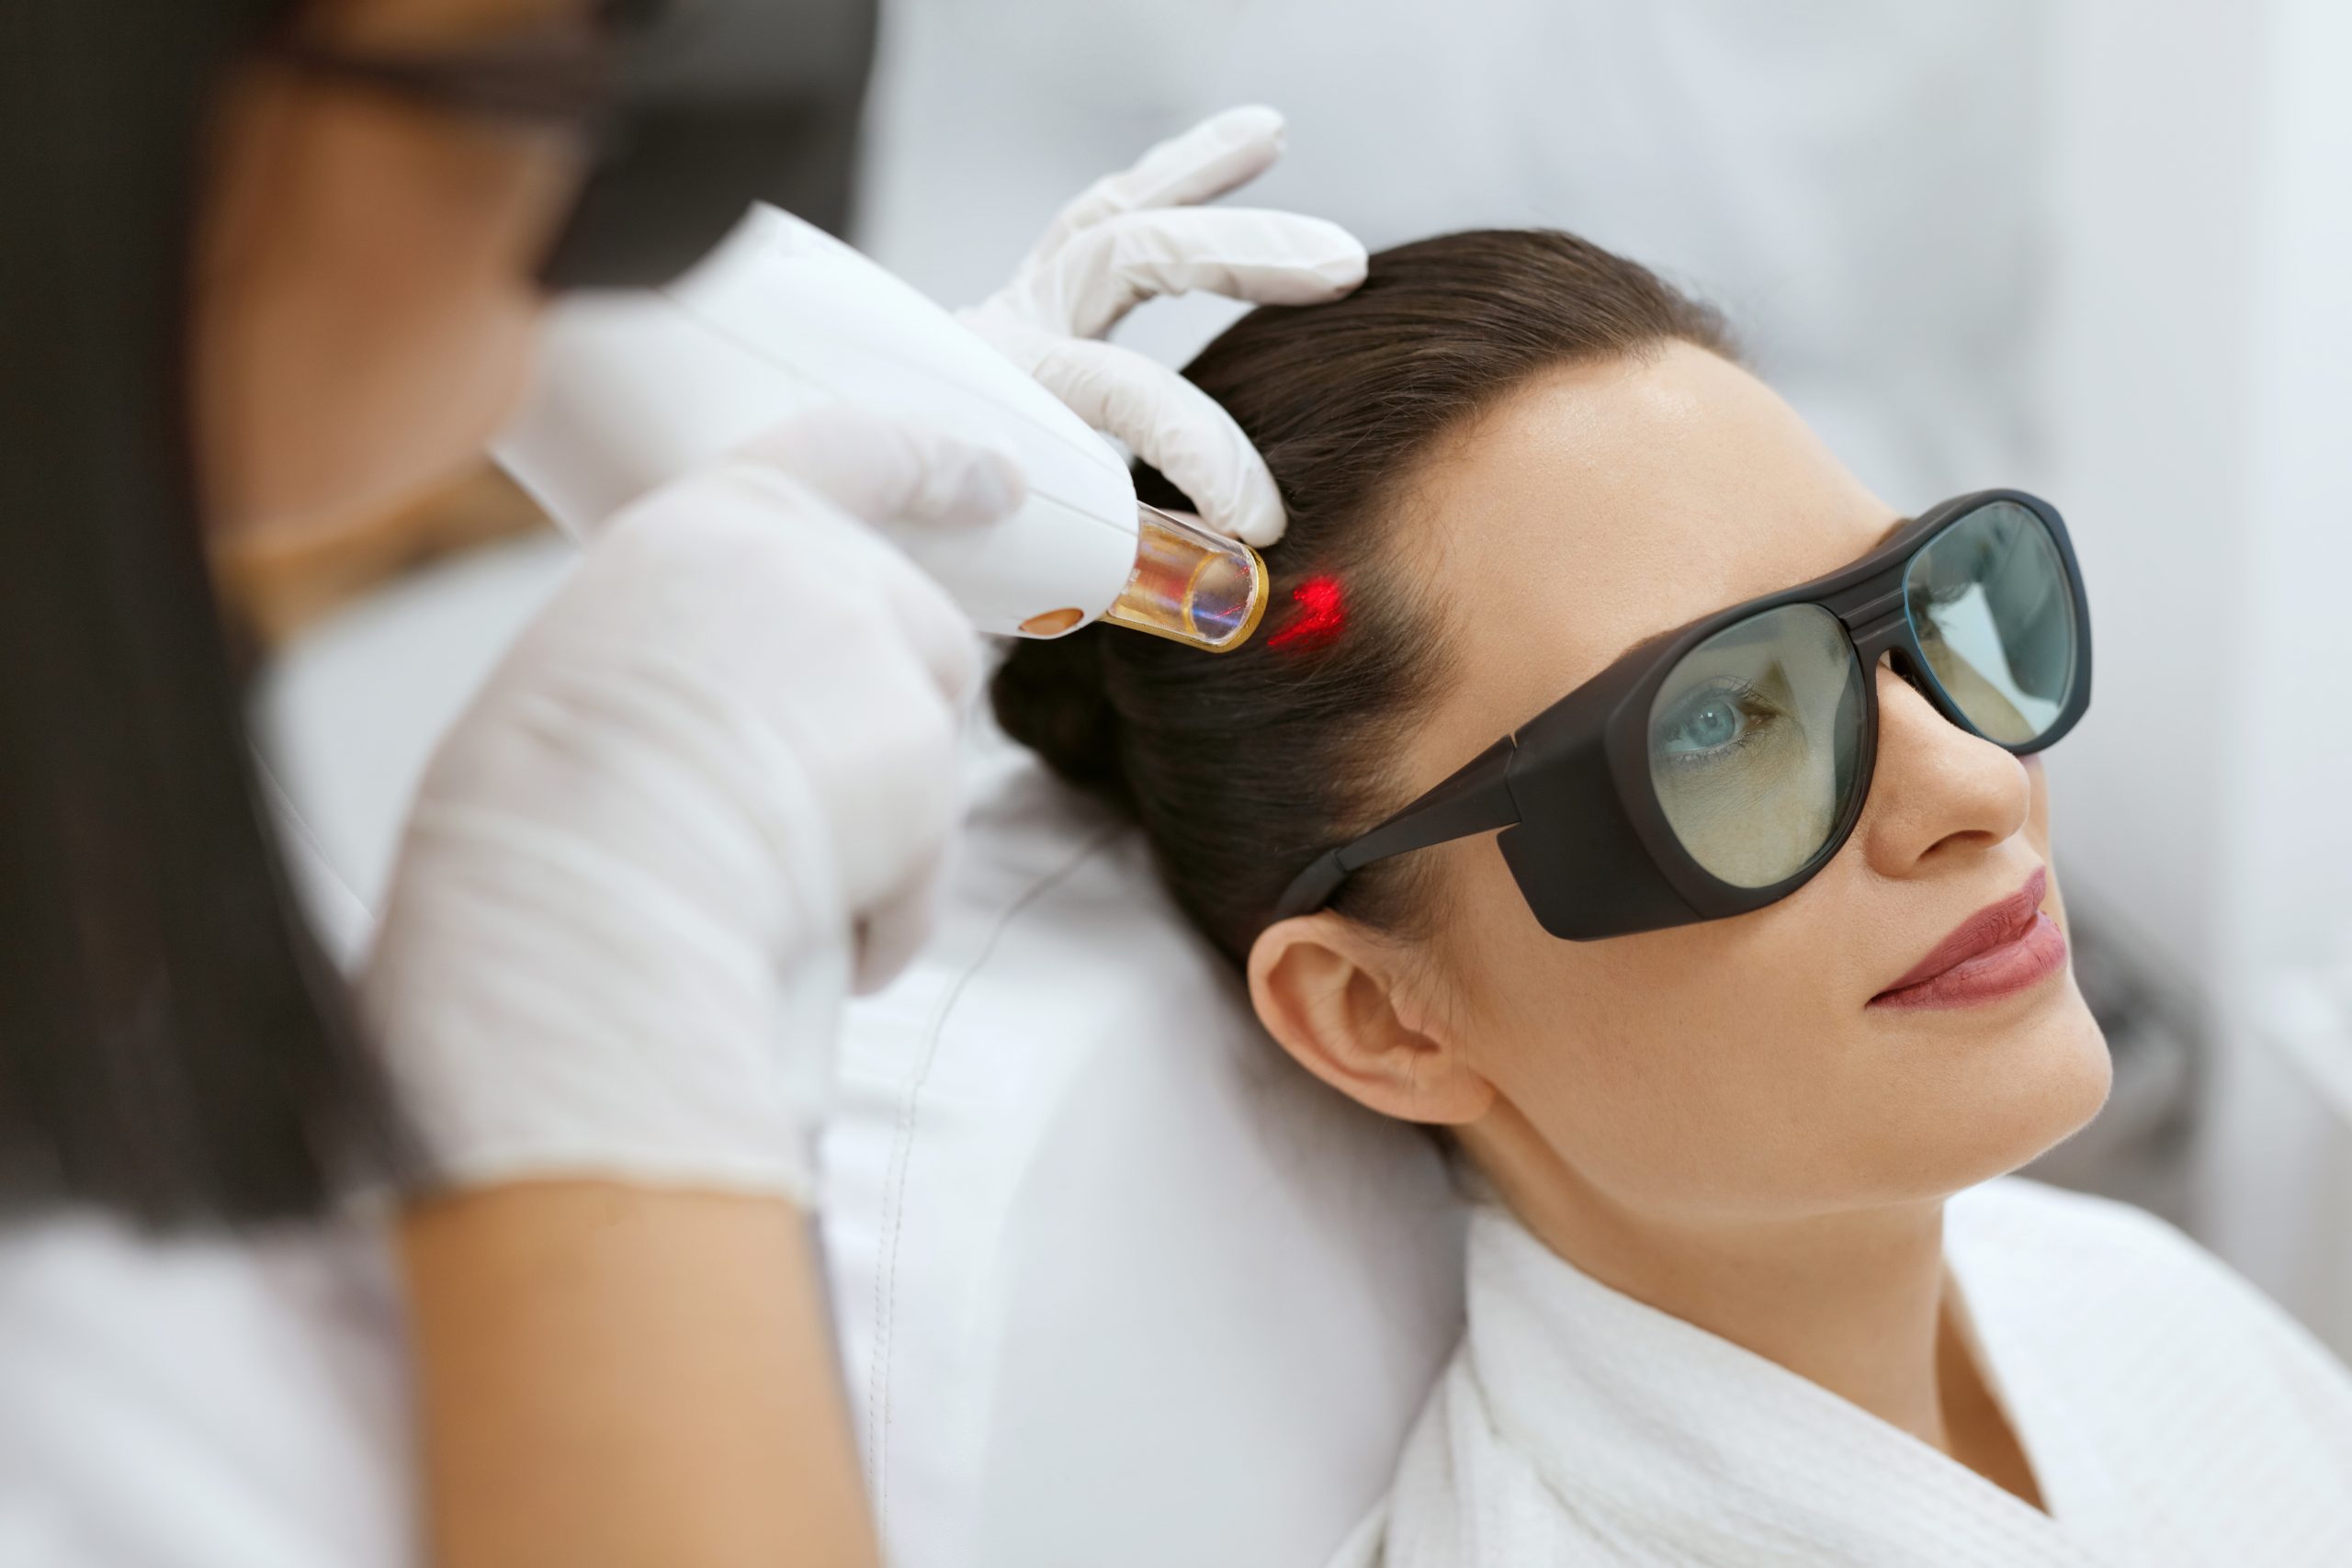 A Novel Hair Loss Treatment: Low-Level Laser Therapy